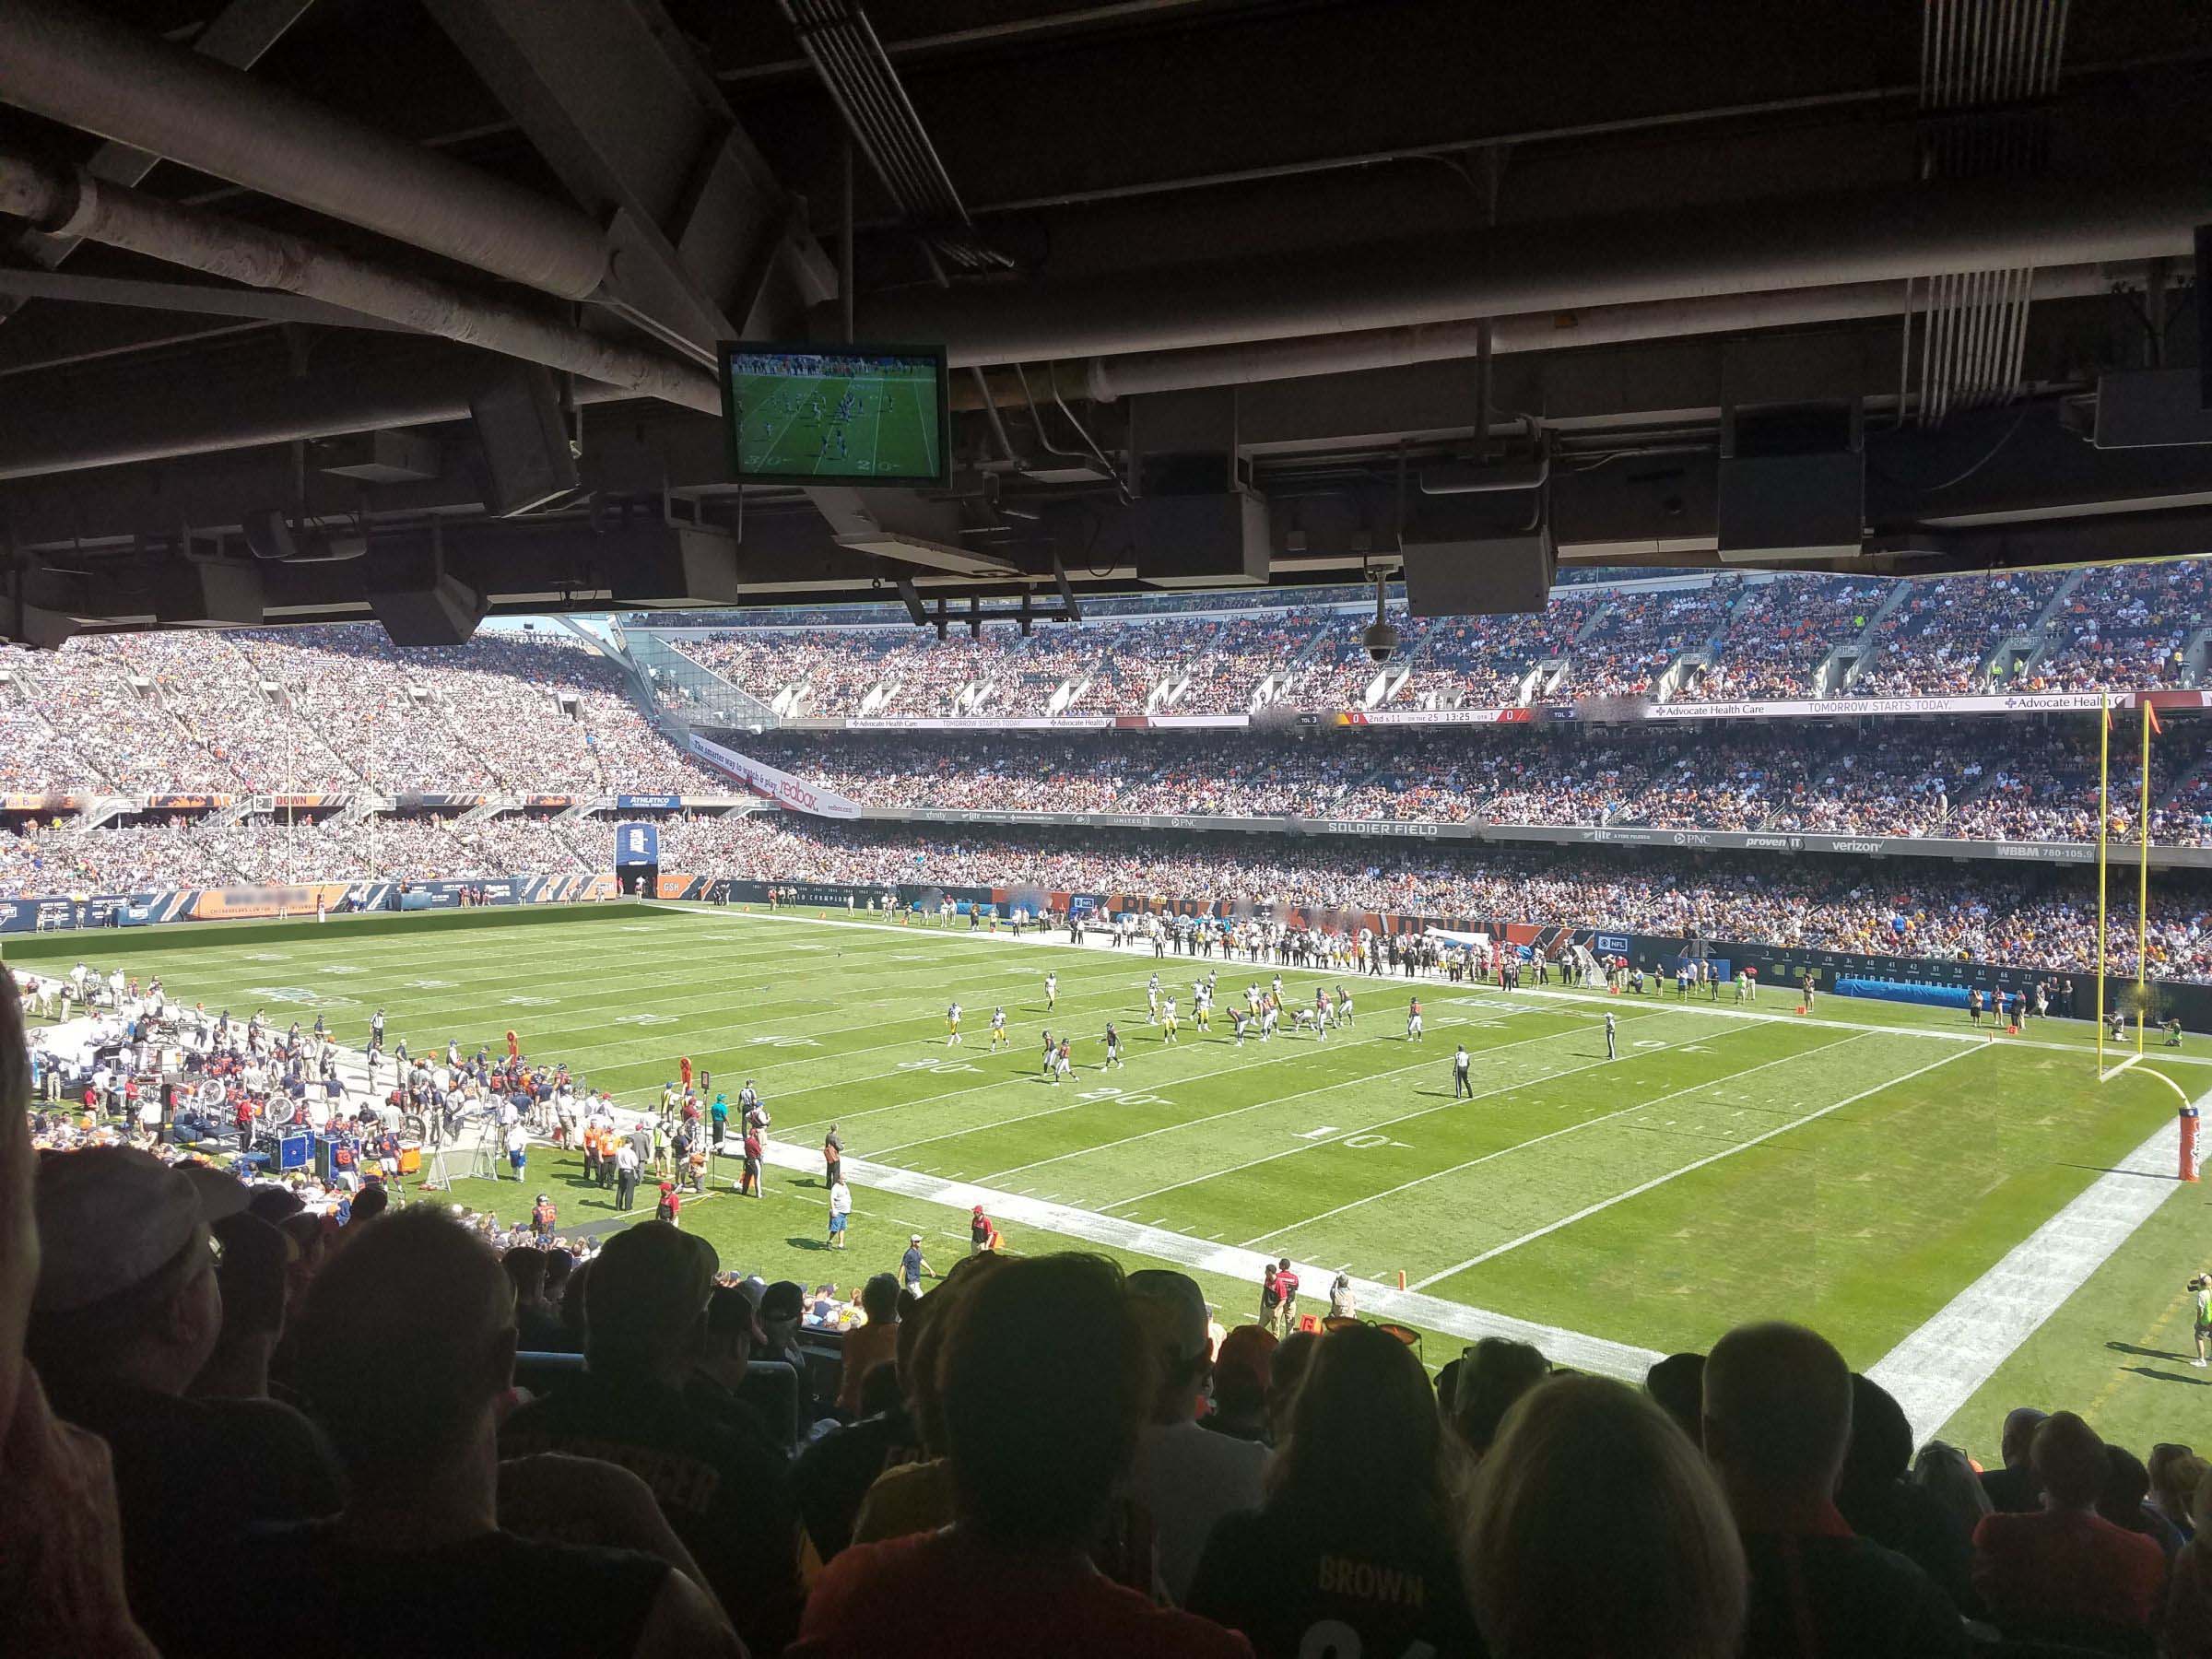 section 230, row 10 seat view  for football - soldier field